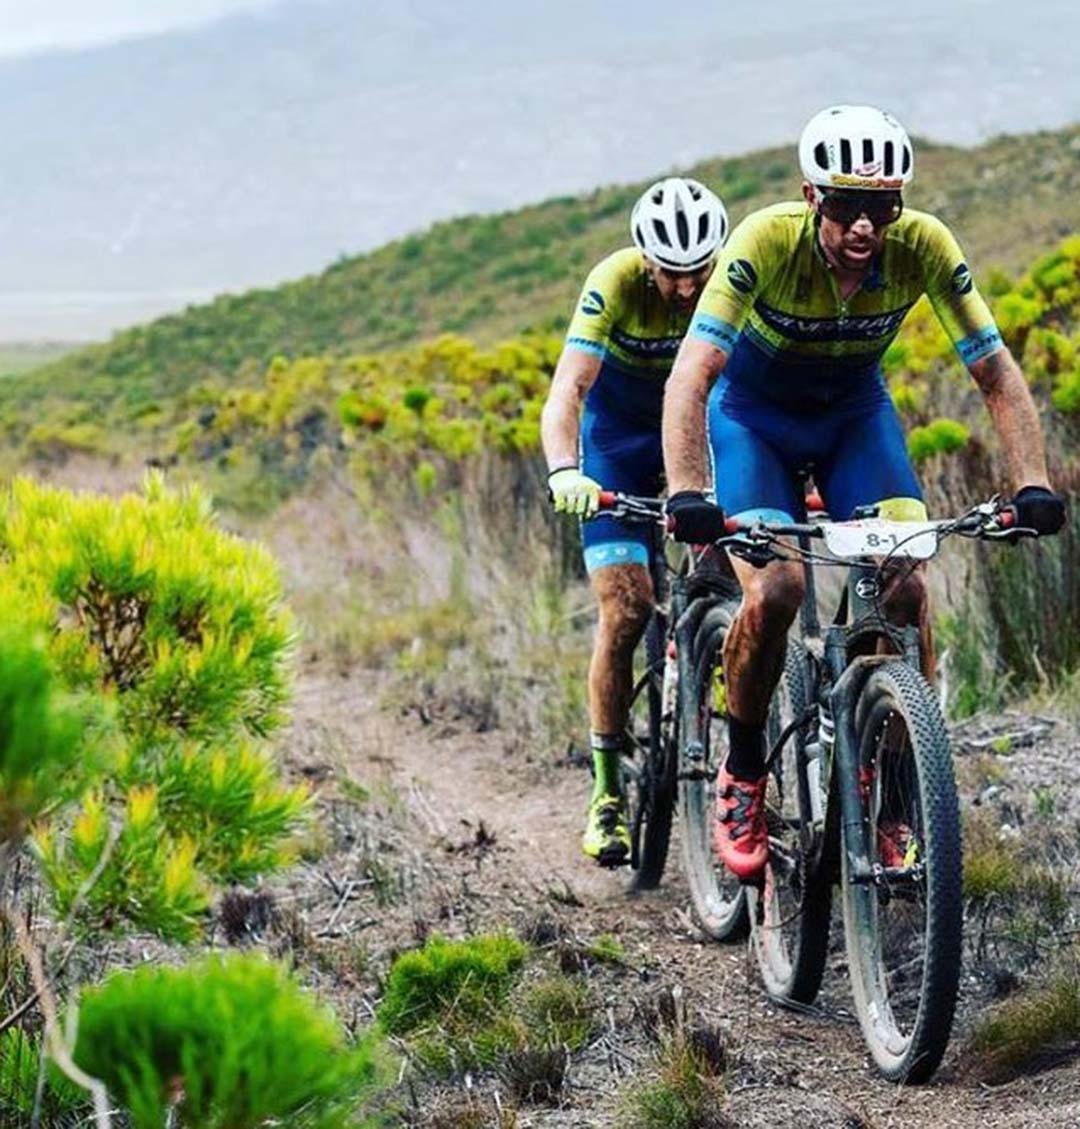 Nicola Rohrbach was facing his personal Waterloo at the Cape Epic